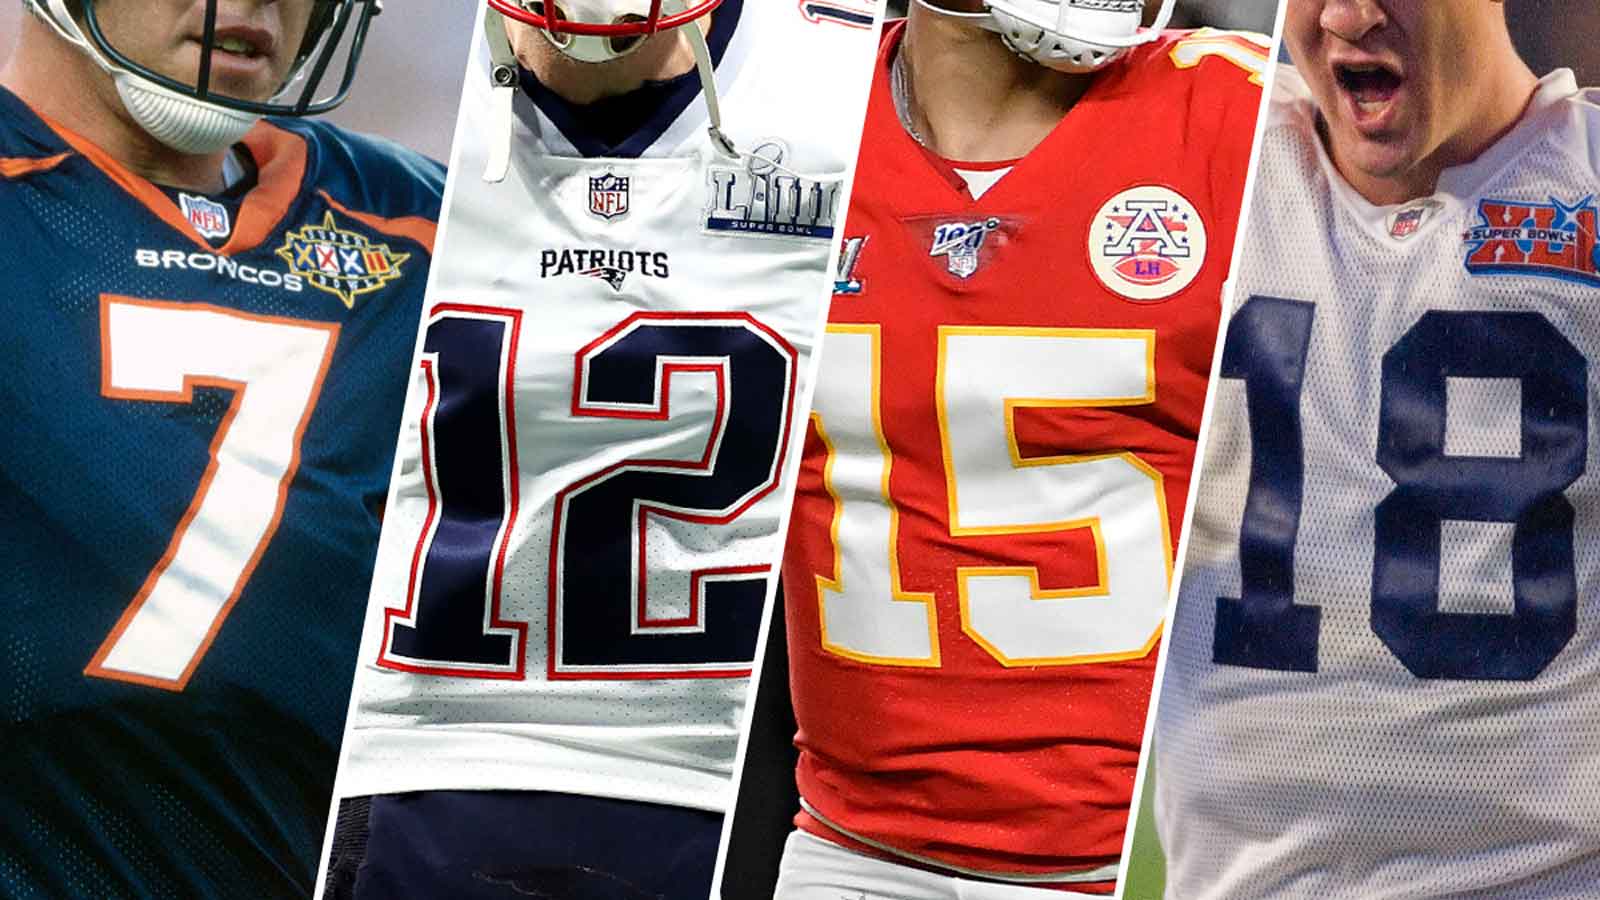 Best player by jersey number for 2022 NFL season – NBC Sports Boston